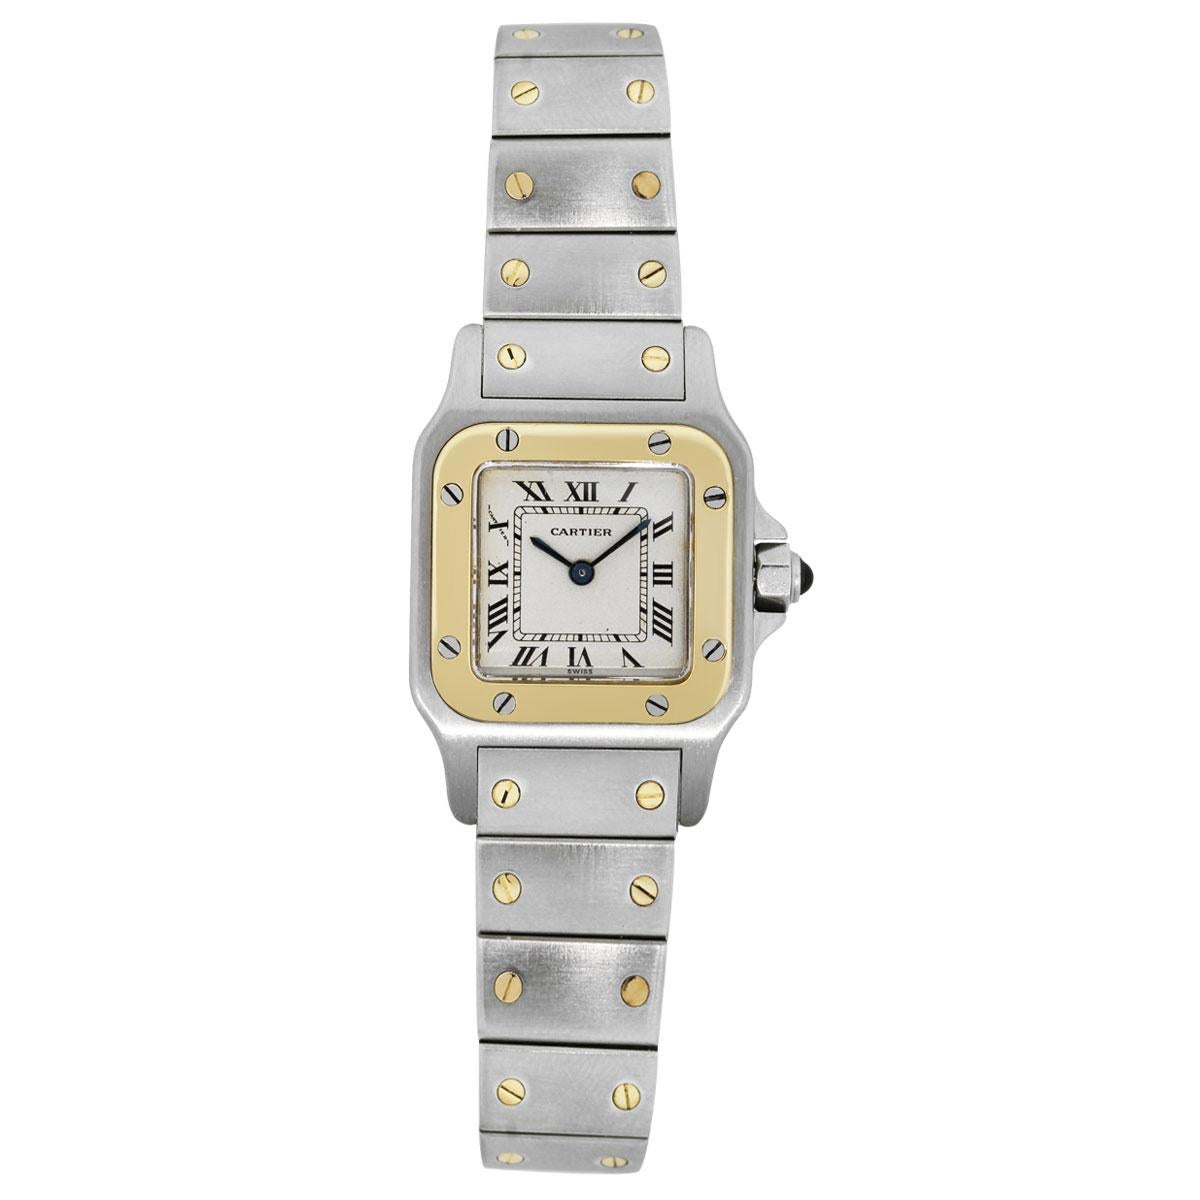 Brand: Cartier
Model: Santos
Case Material: Stainless steel
Case Diameter: 26mm
Crystal: Sapphire crystal
Bezel: Smooth 18k yellow gold bezel with stainless steel Cartier screws
Dial: Off-White dial with black roman numerals. Blue hour and minute